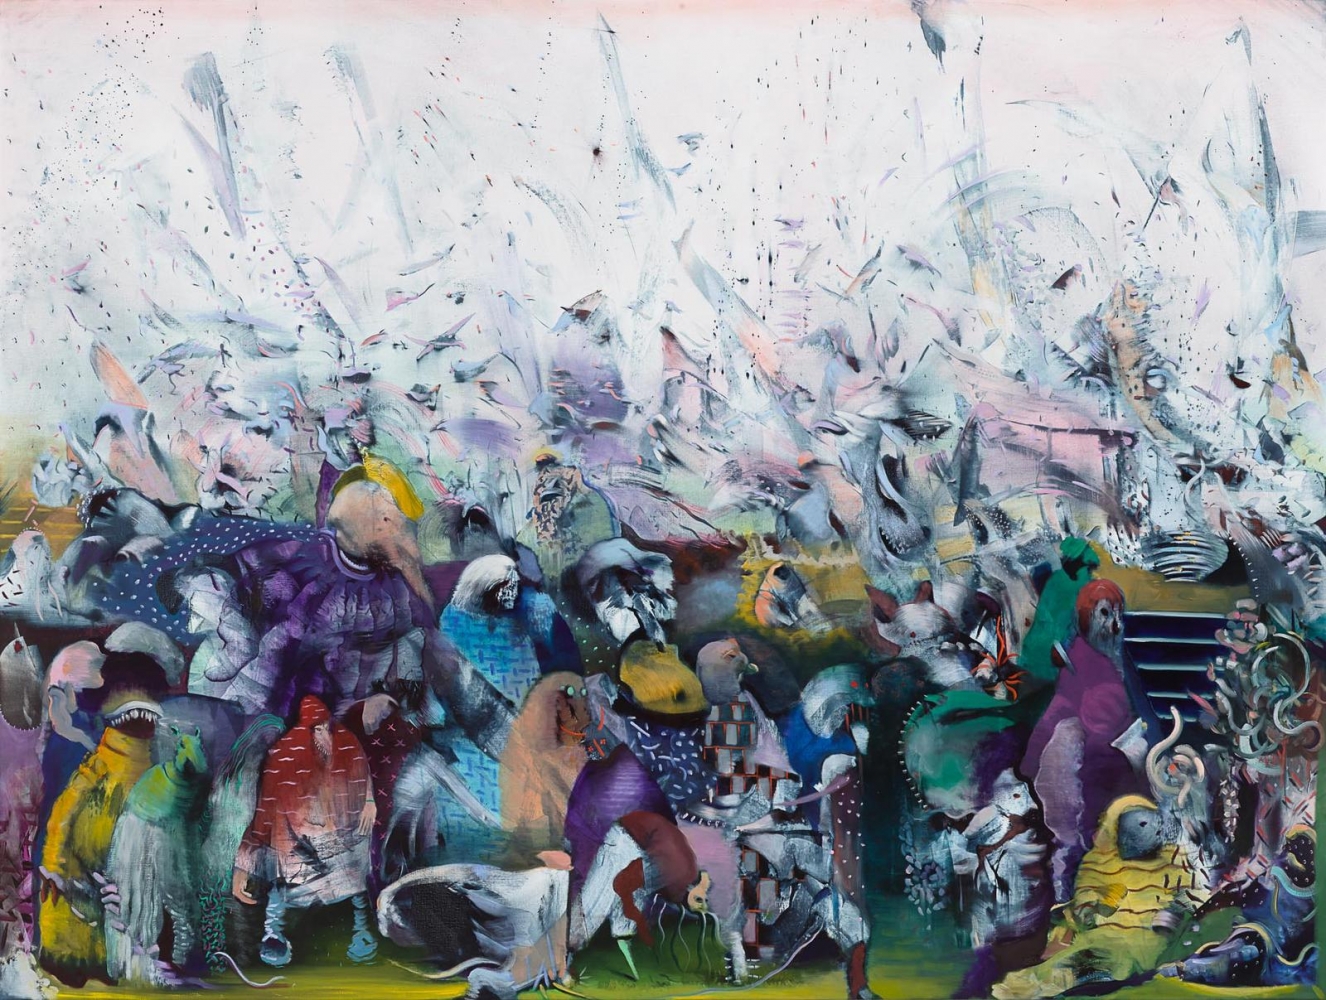 Ali Banisadr The Rise of the Blond, 2016